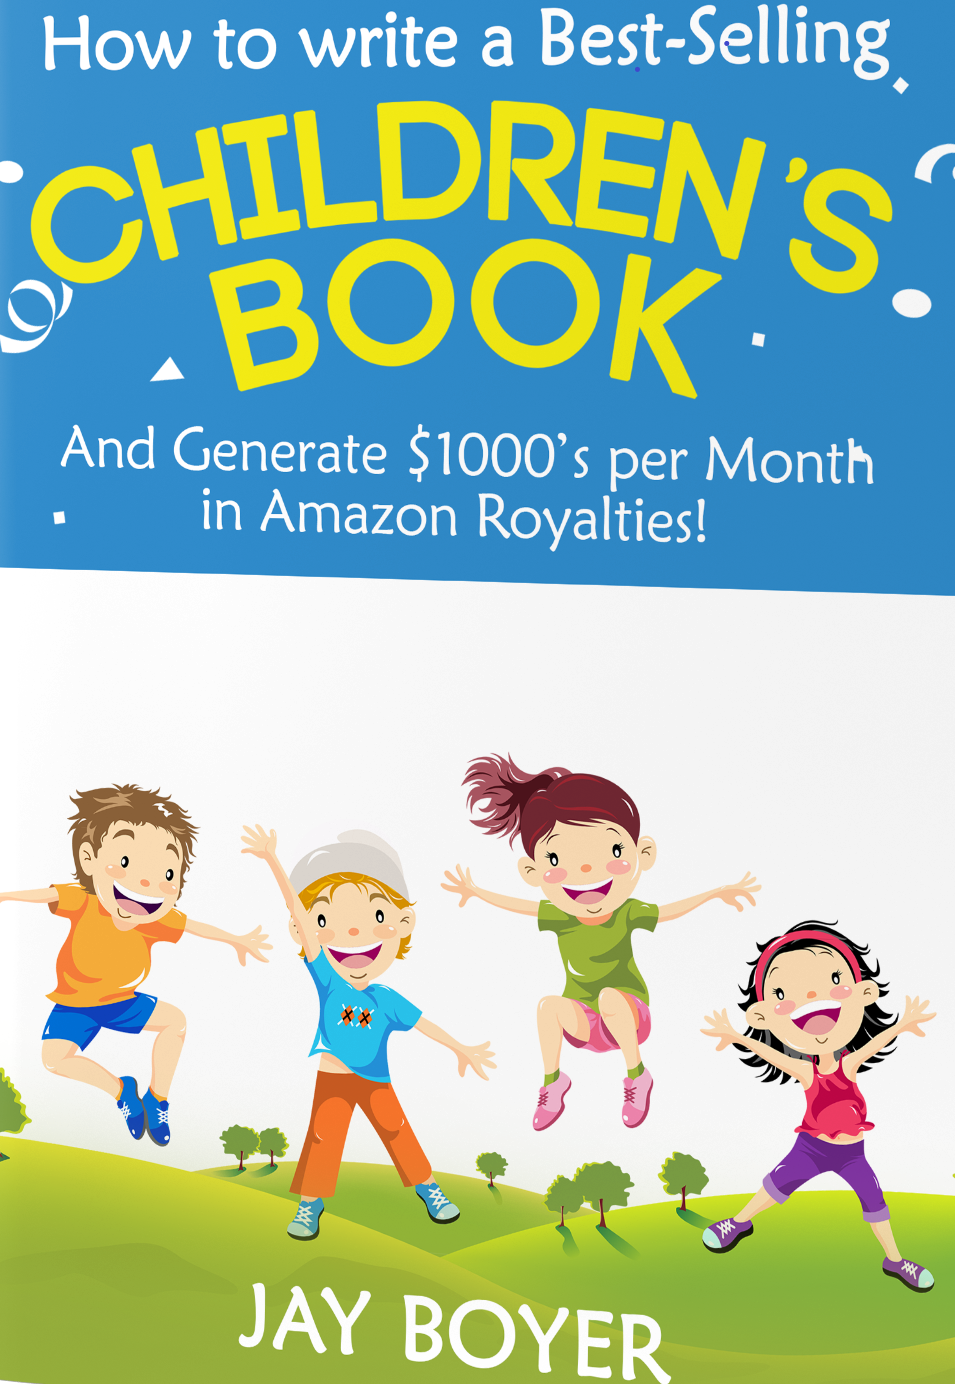 The Best Publishing Guide To Amazon Kindle Children's Book Trim, Size & Margins